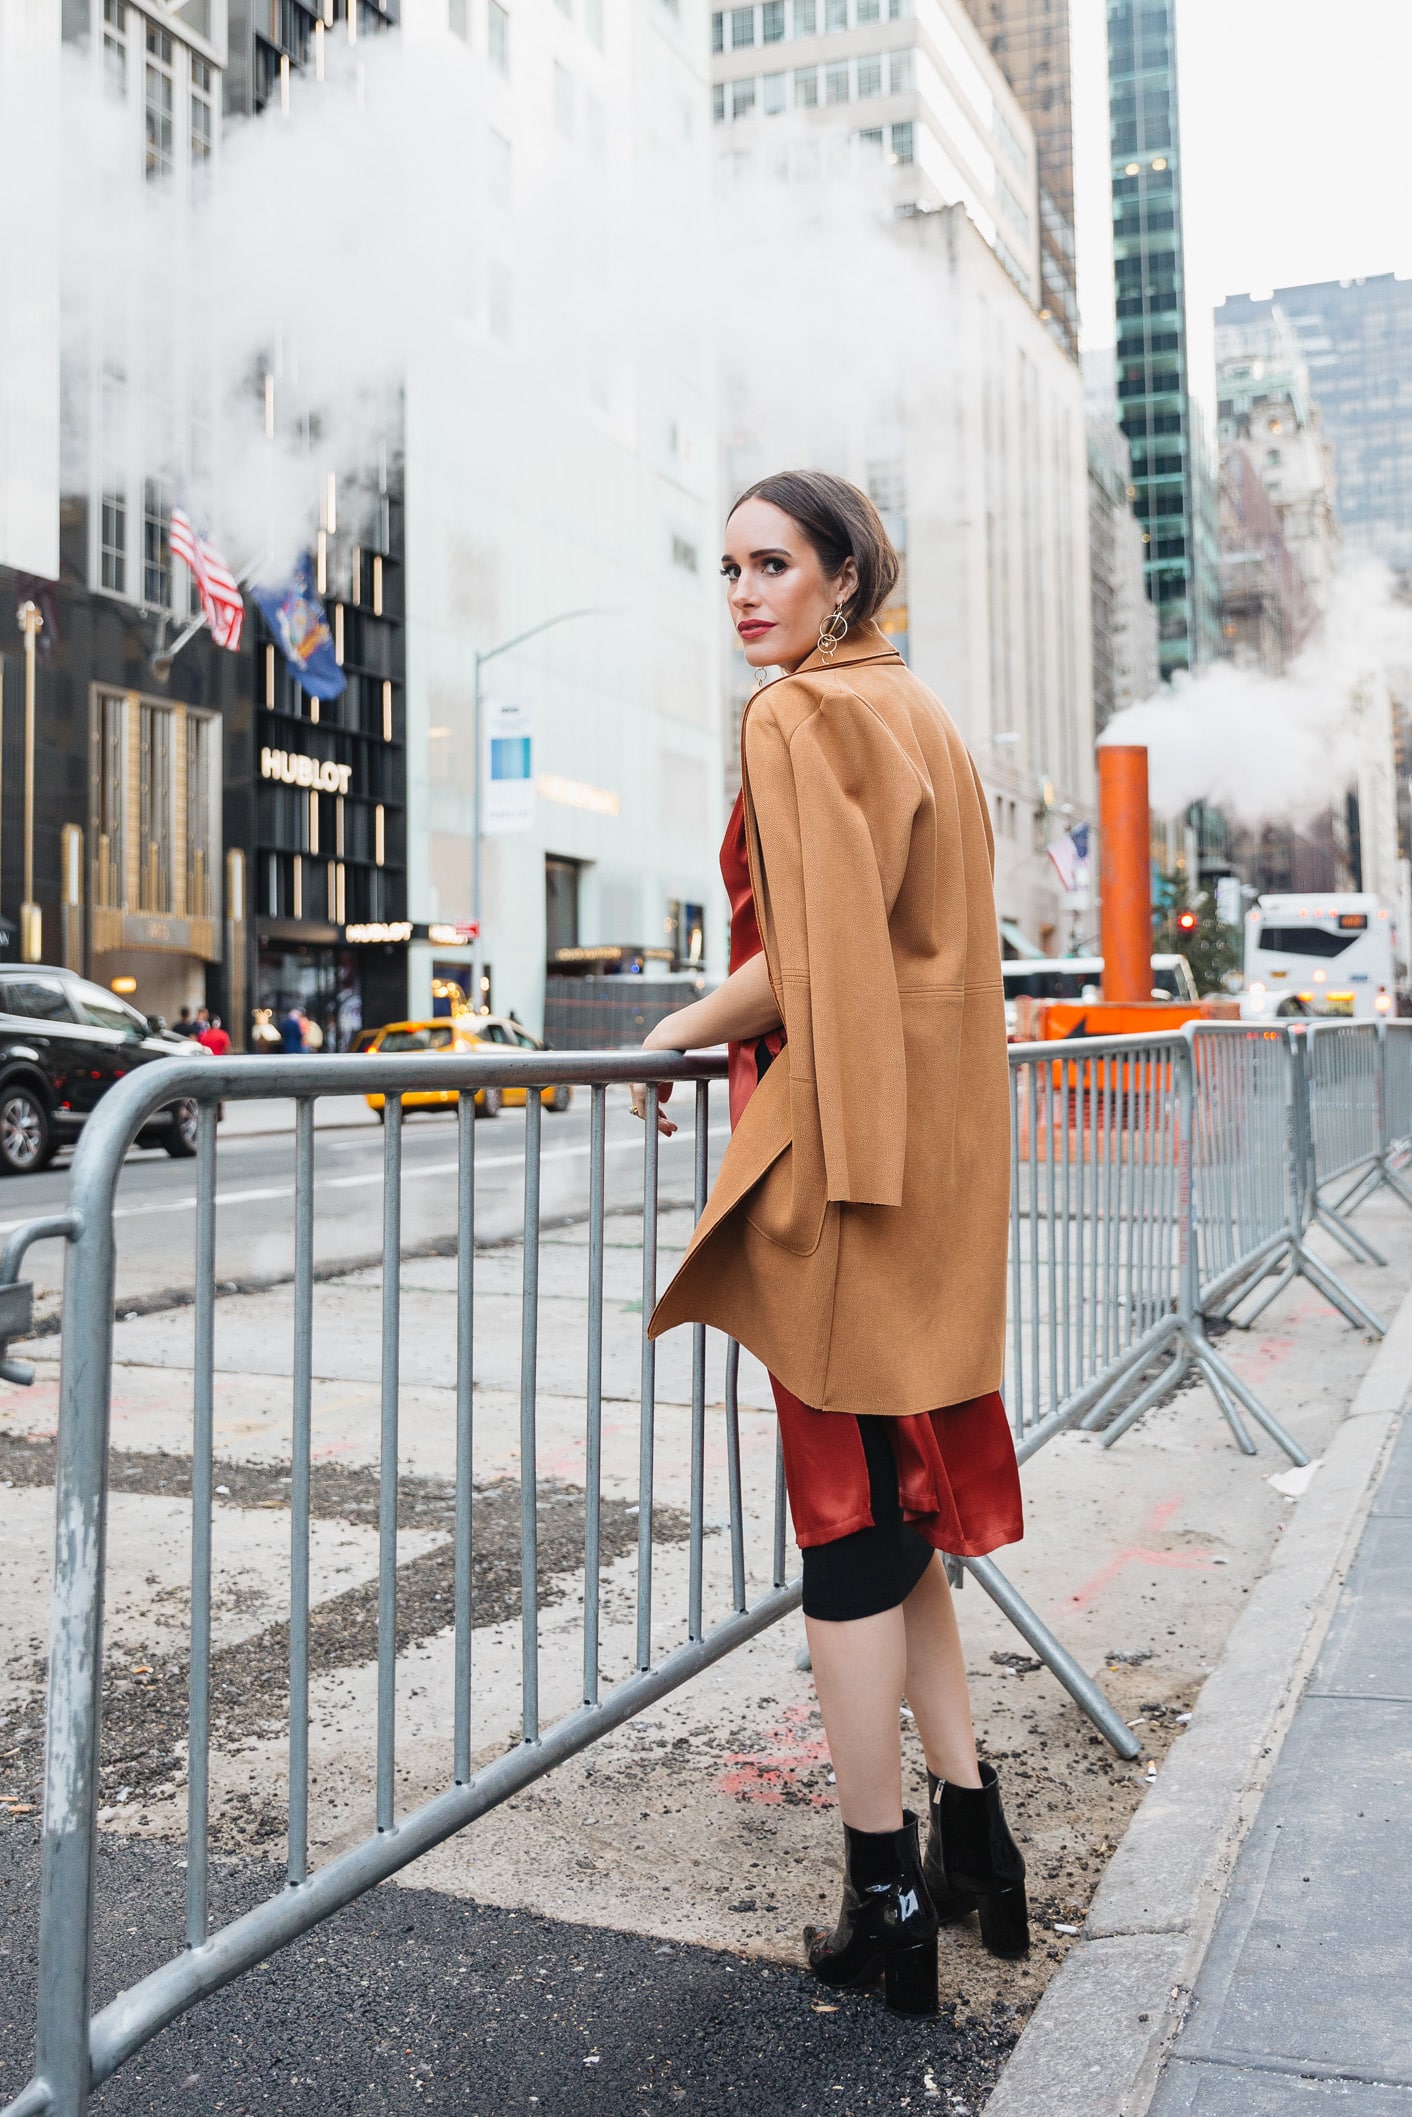 Louise Roe wearing copper tunic at NYFW